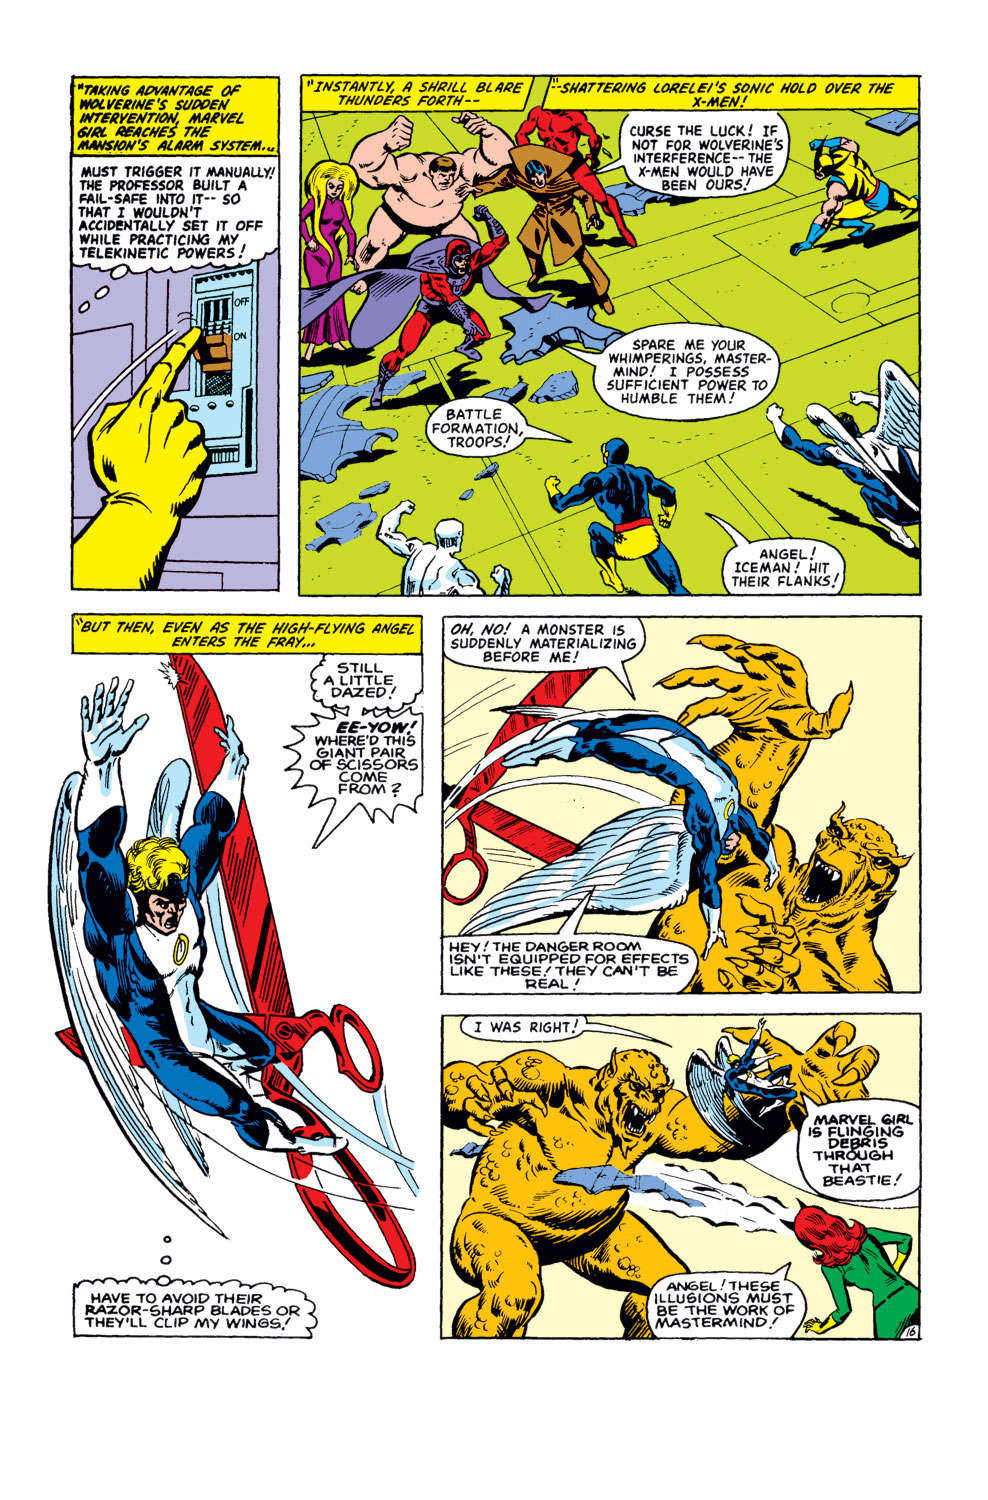 What If? (1977) issue 31 - Wolverine had killed the Hulk - Page 17